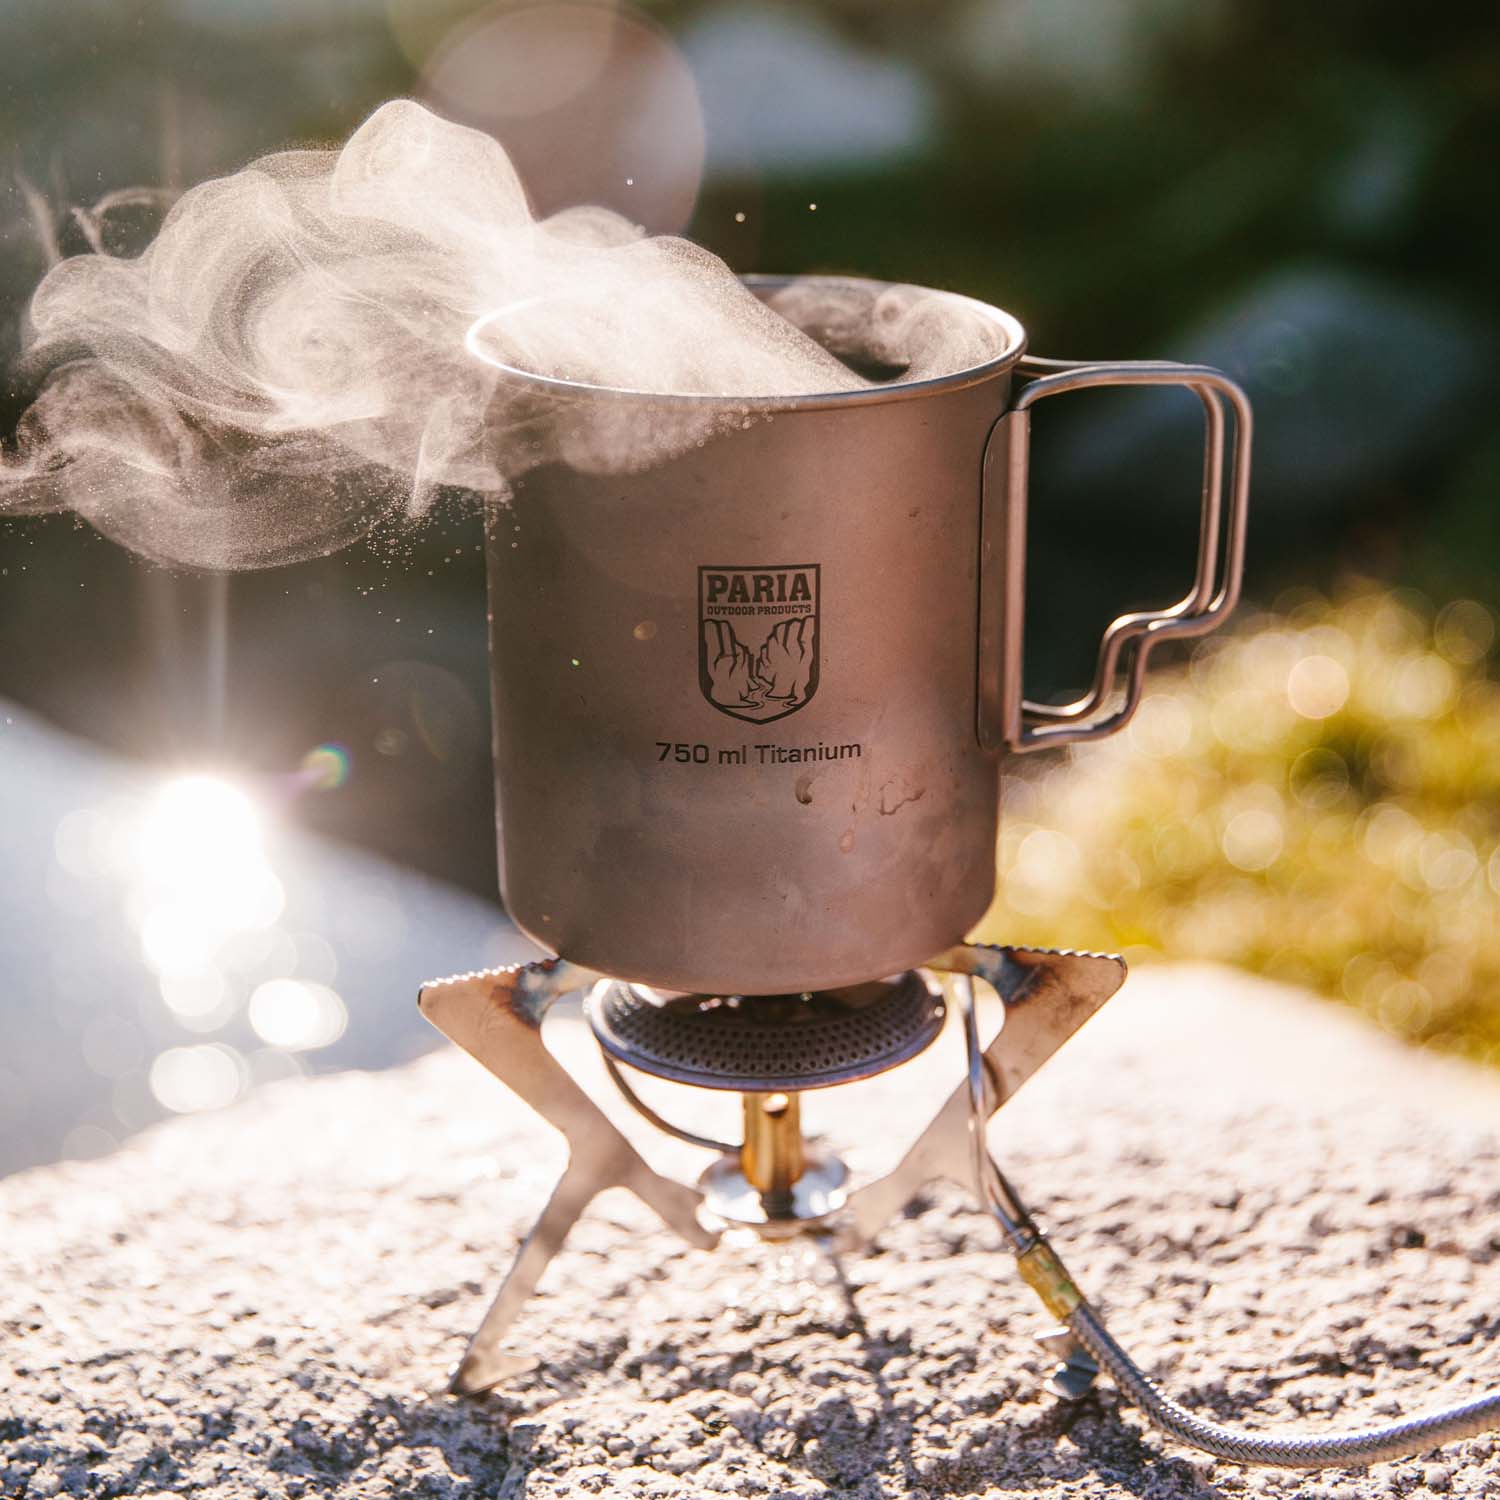 Backpacking Cookware 101: Titanium, Aluminum & Stainless Steel